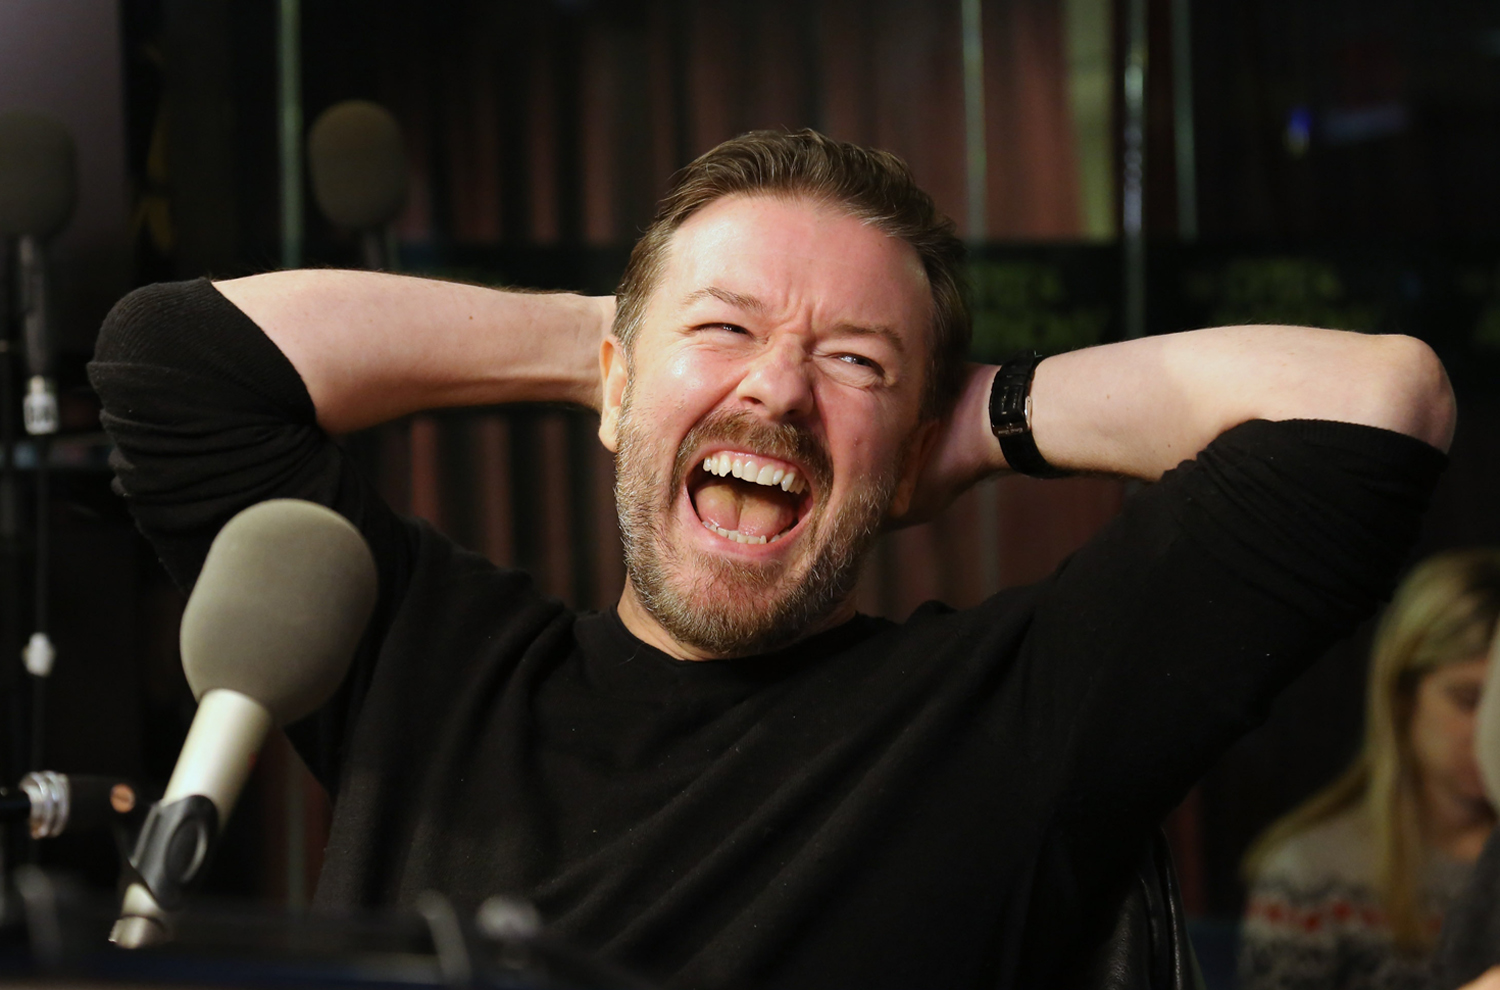 Image: Ricky Gervais Visits SiriusXM's "Opie & Anthony Show"